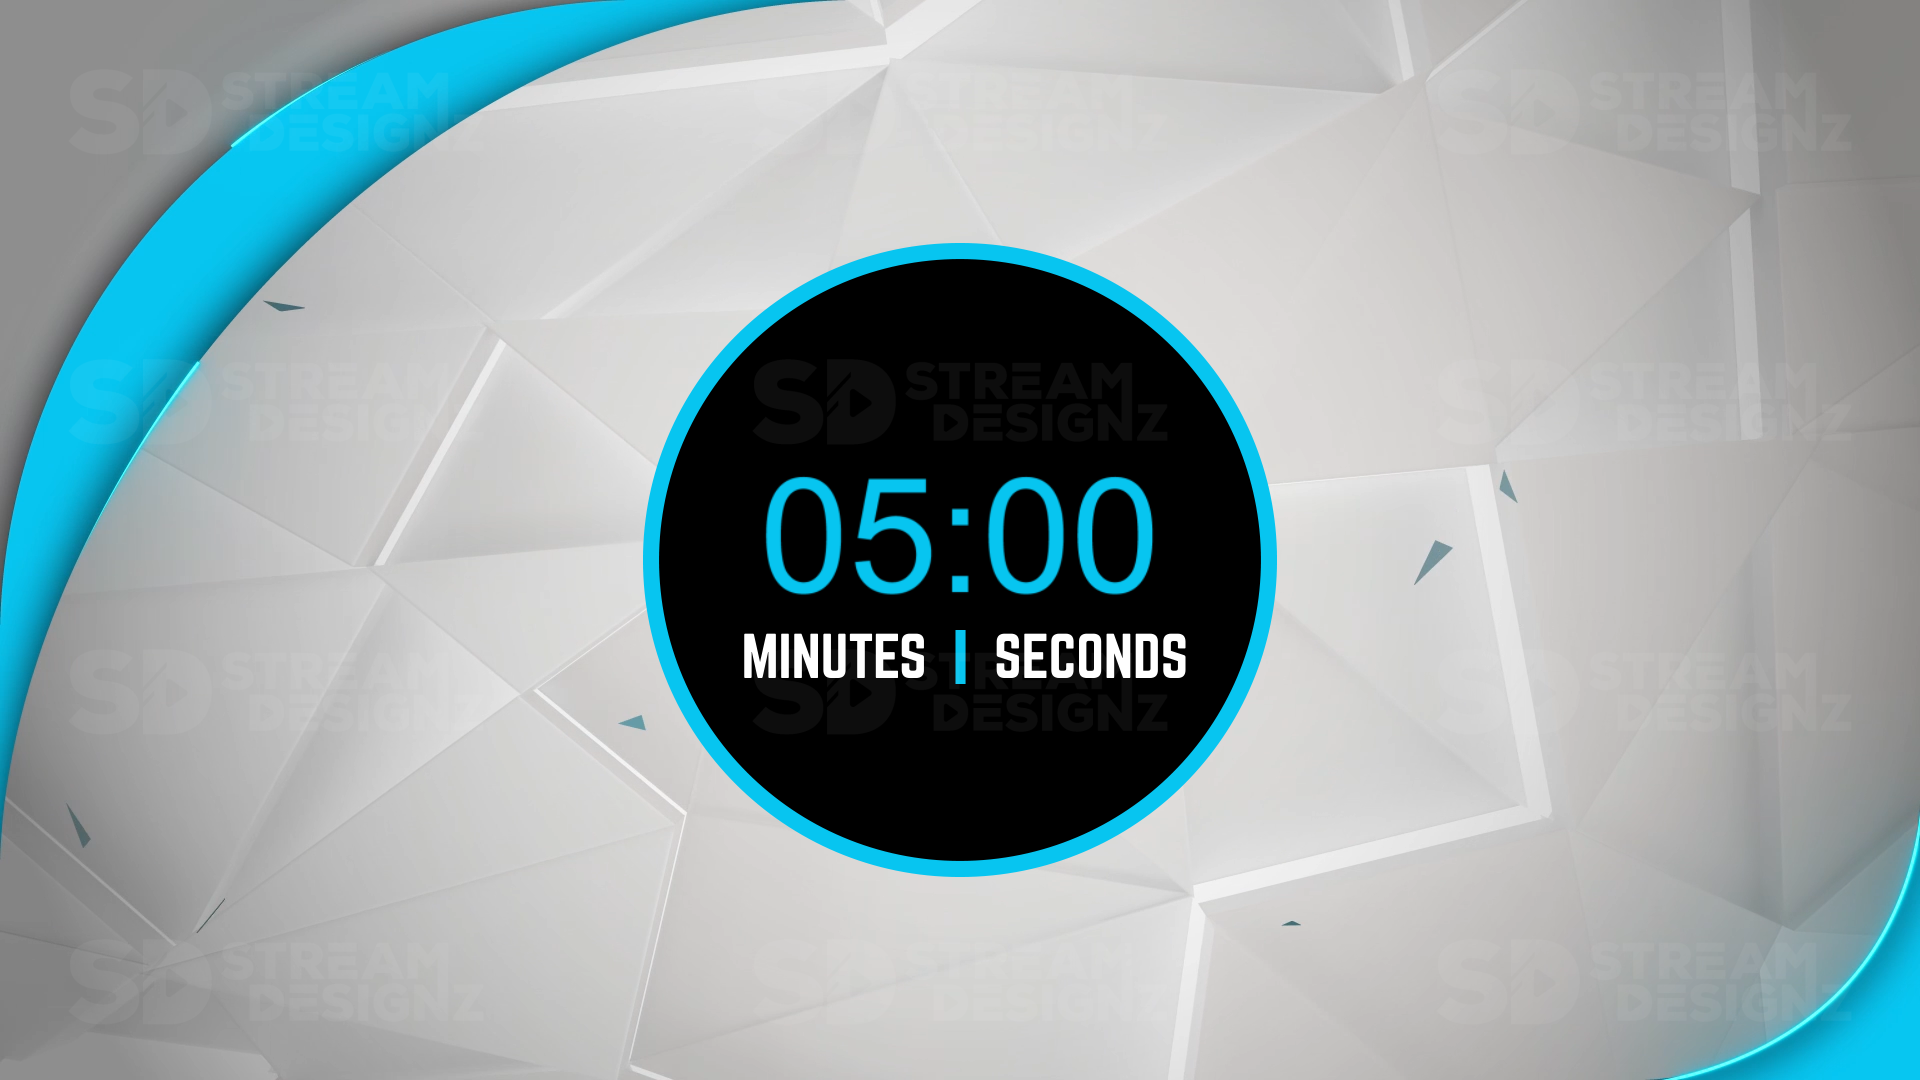 Live countdown timer